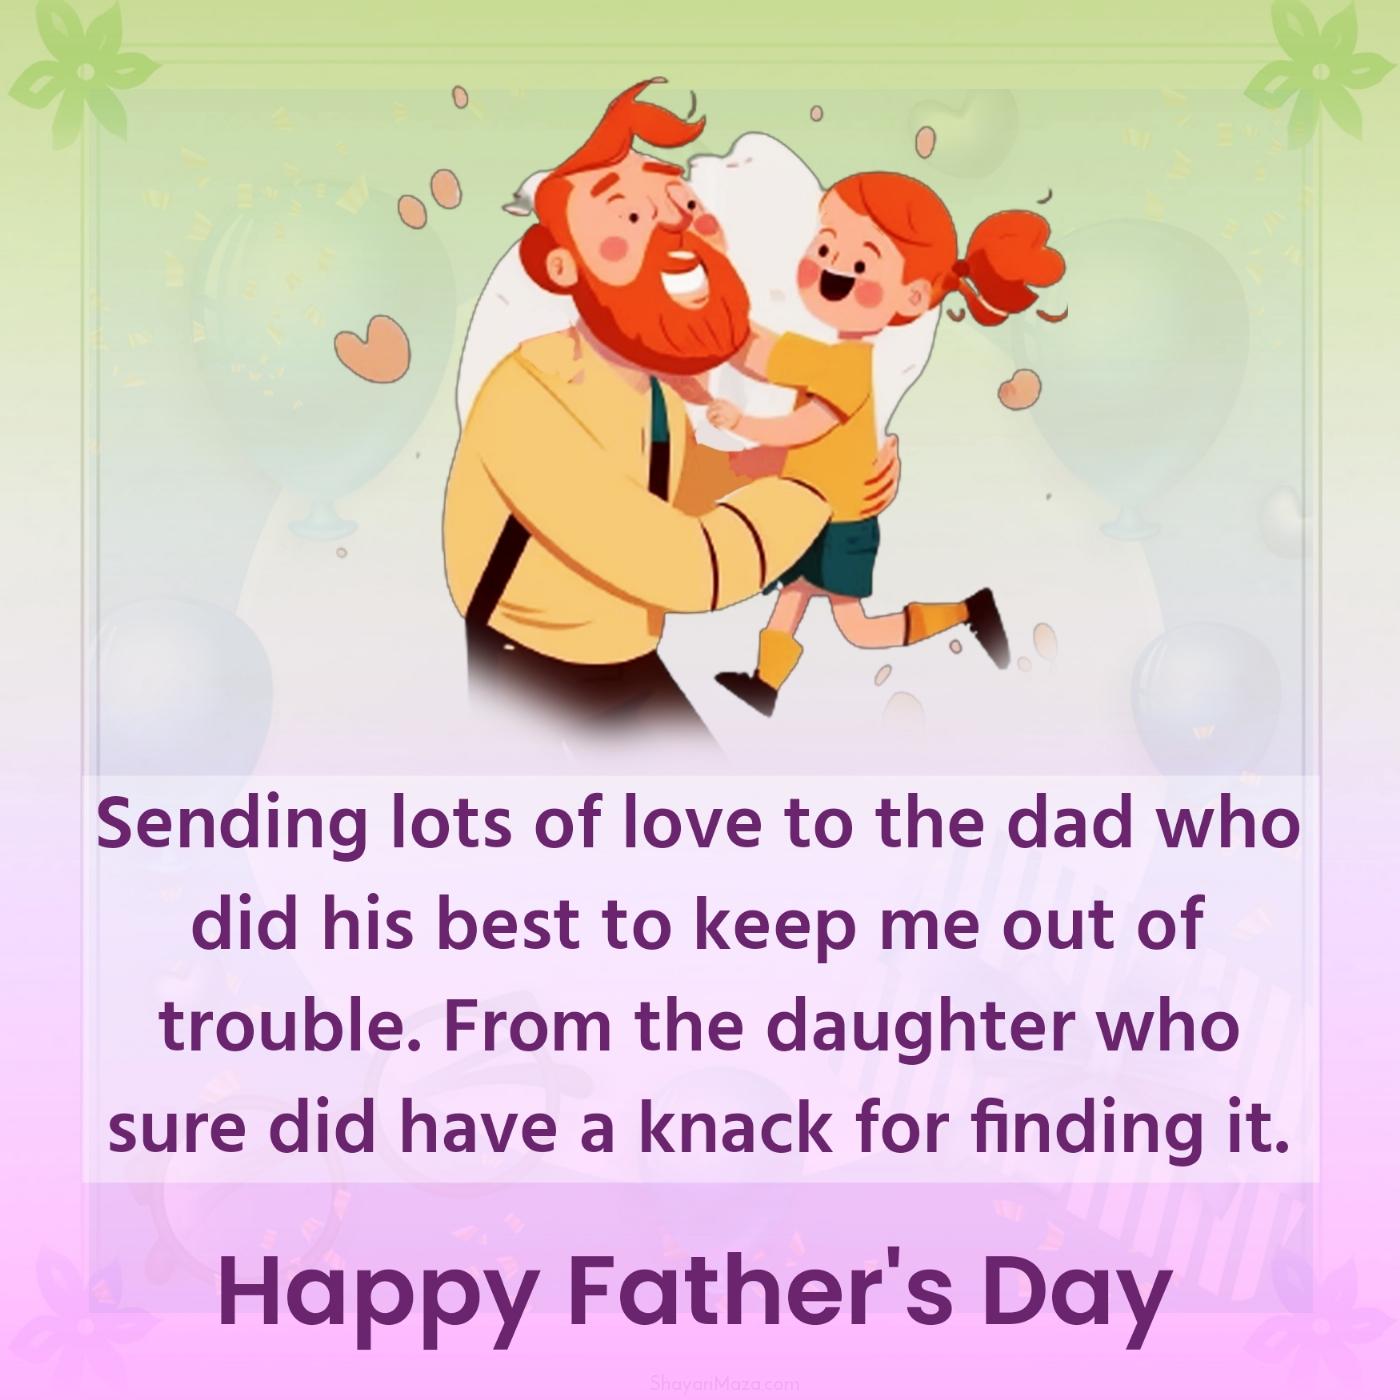 Sending lots of love to the dad who did his best